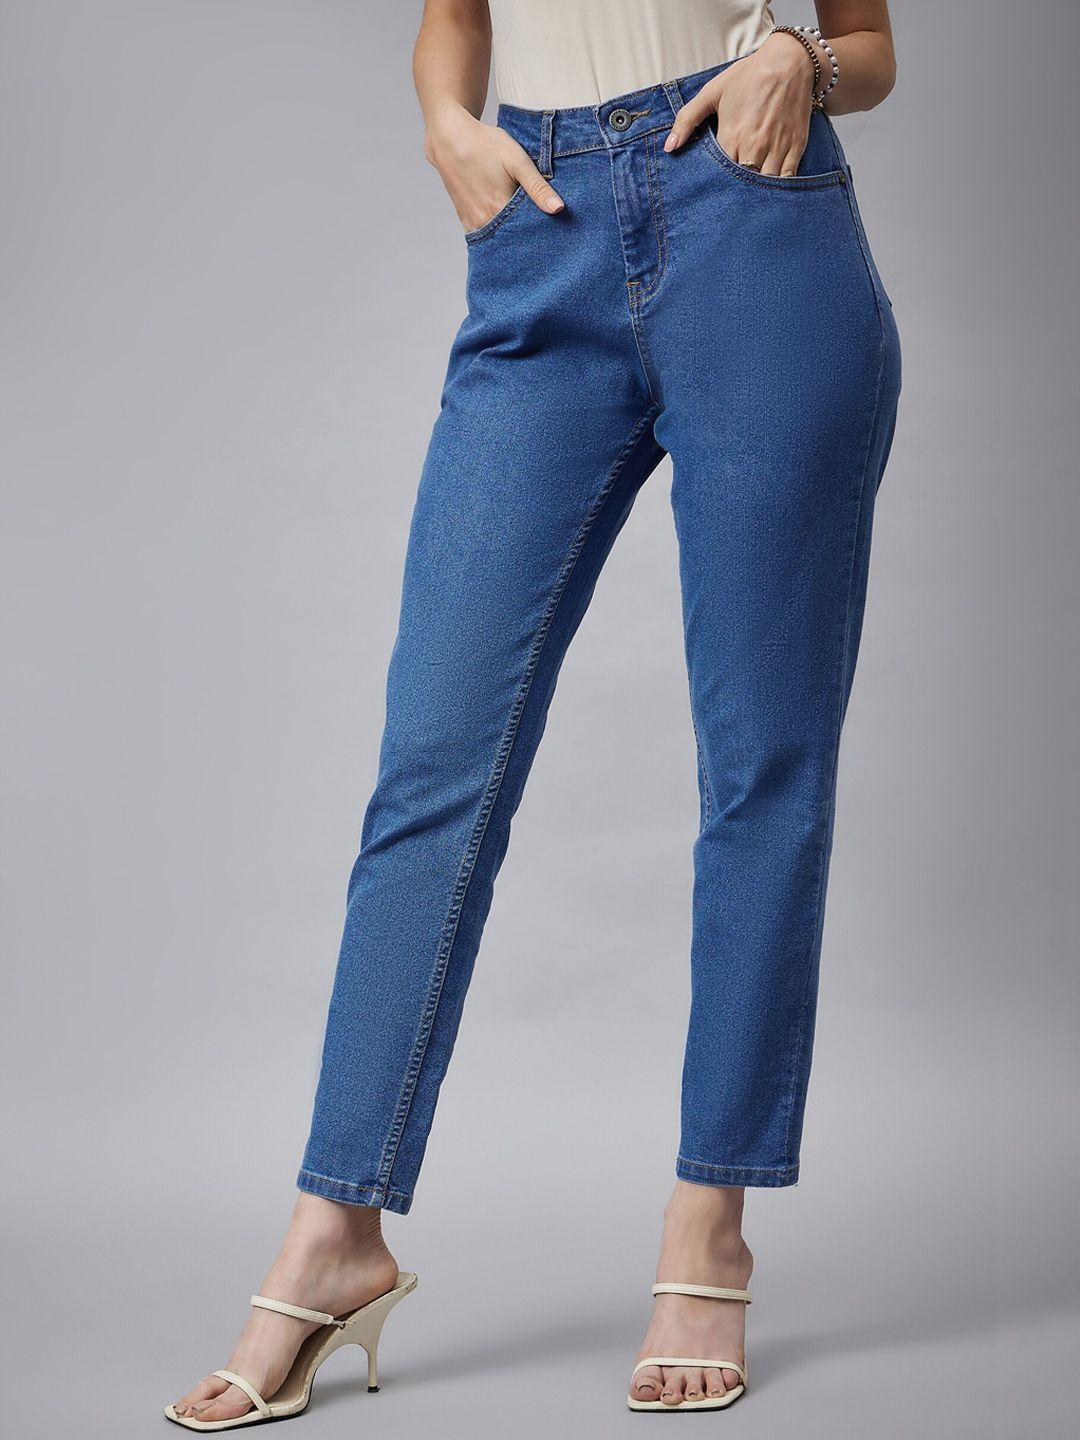 chemistry-women-comfort-mom-fit-high-rise-clean-look-light-fade-stretchable-jeans